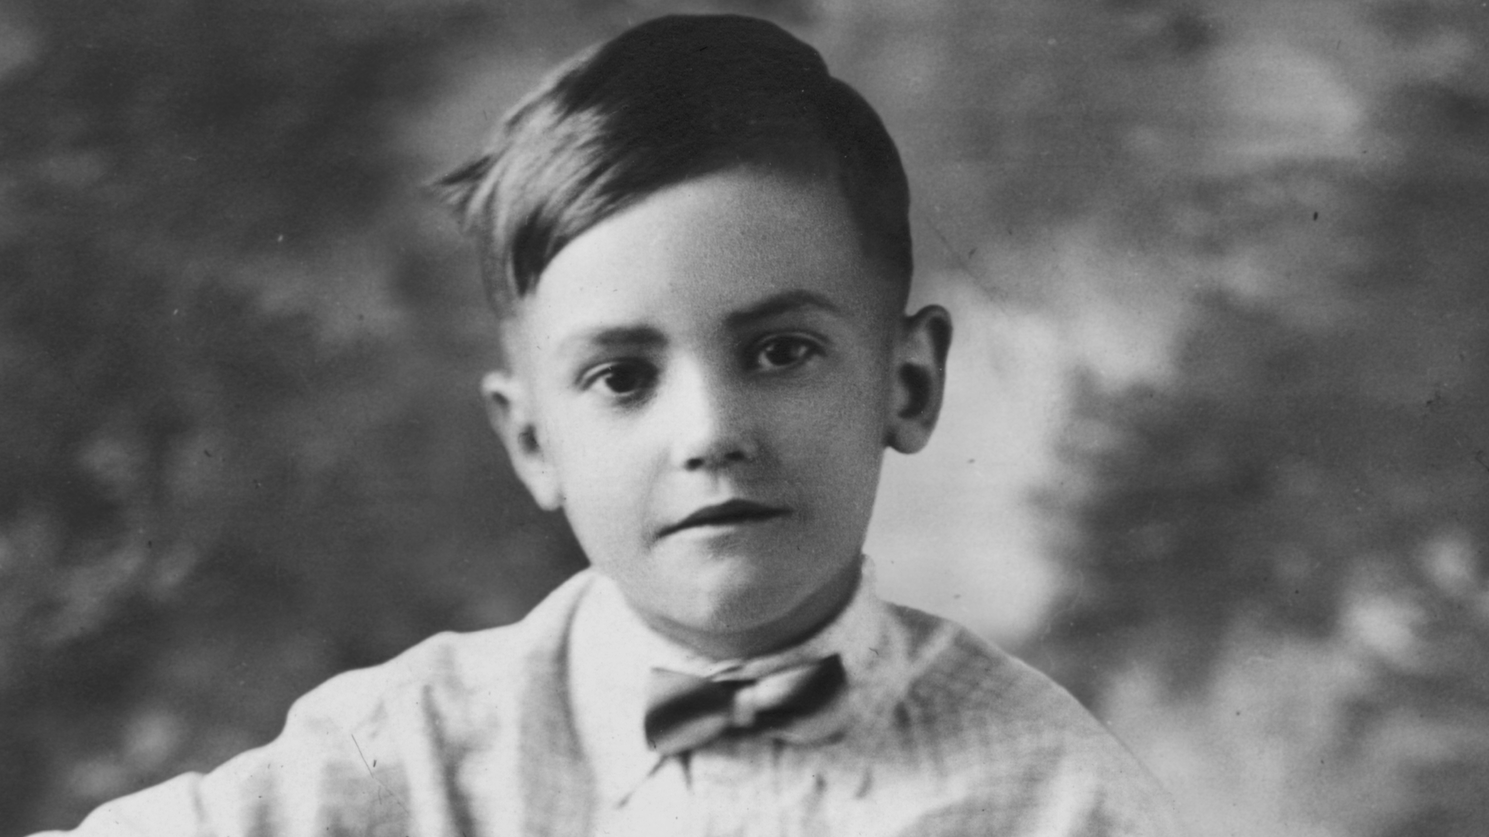 Maurice as young boy